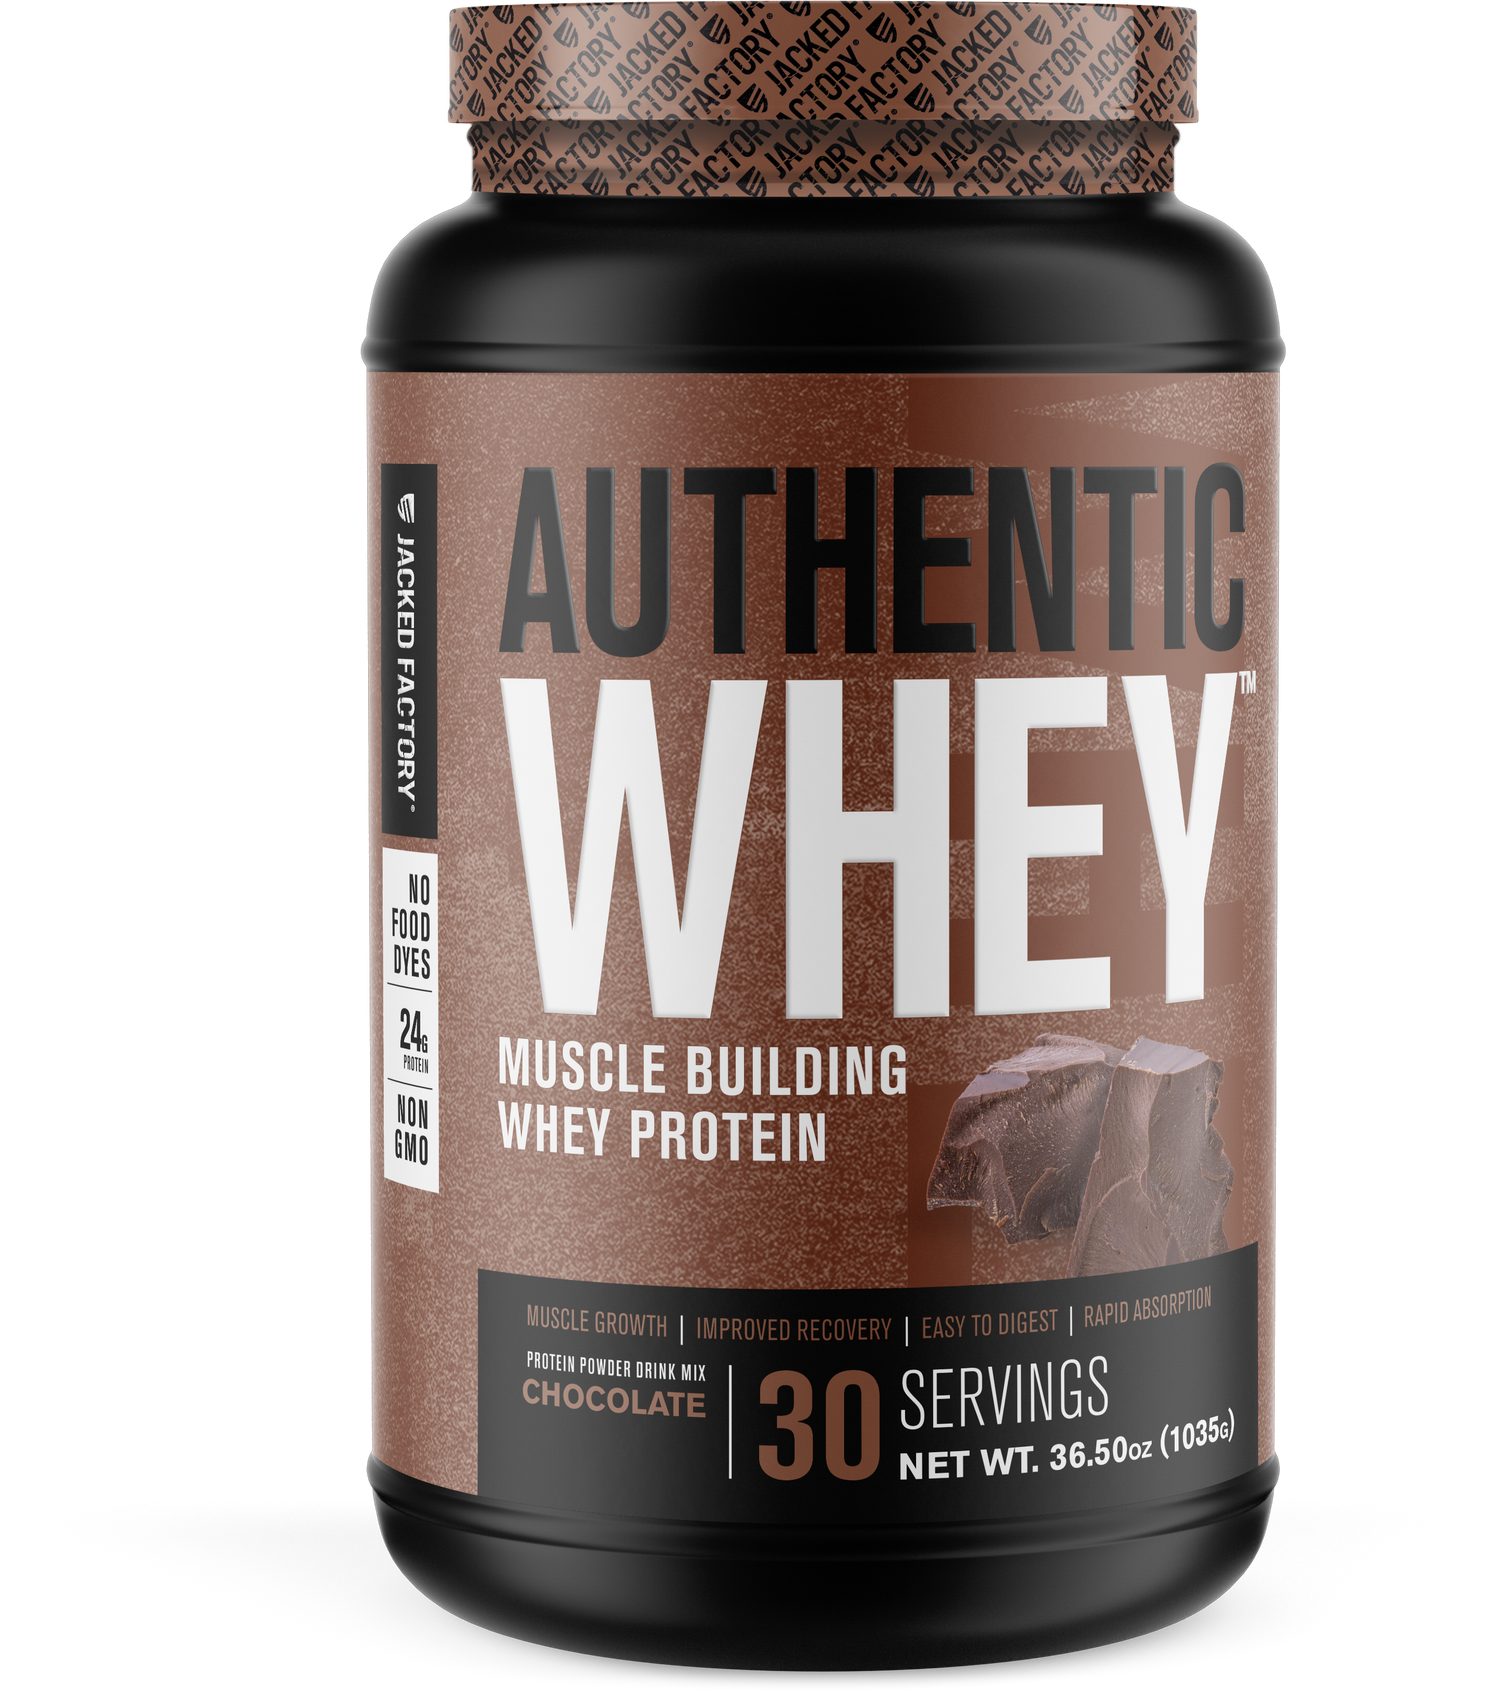 Black bottle with a brown label for Chocolate Authentic Whey (30 servings)